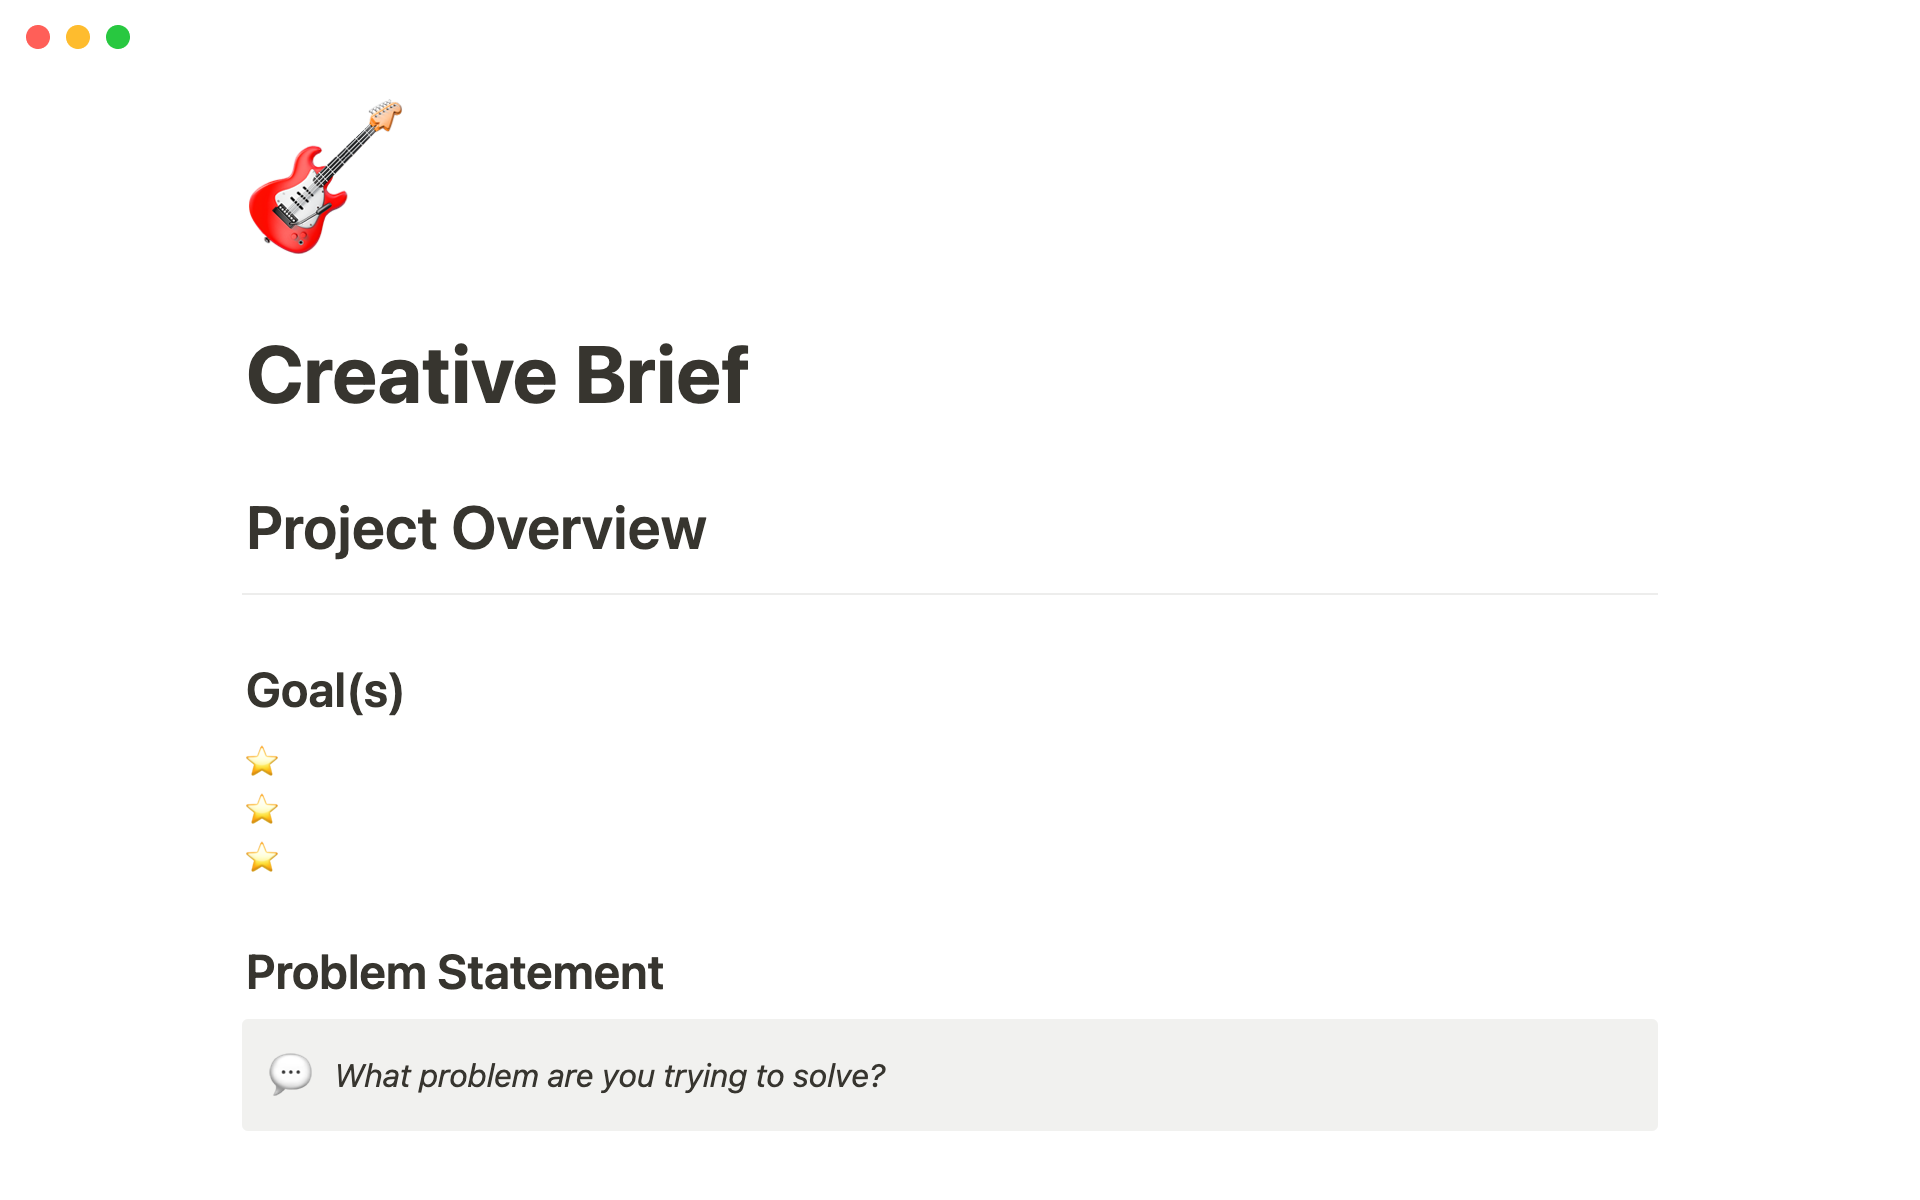 The desktop image for the Creative brief template